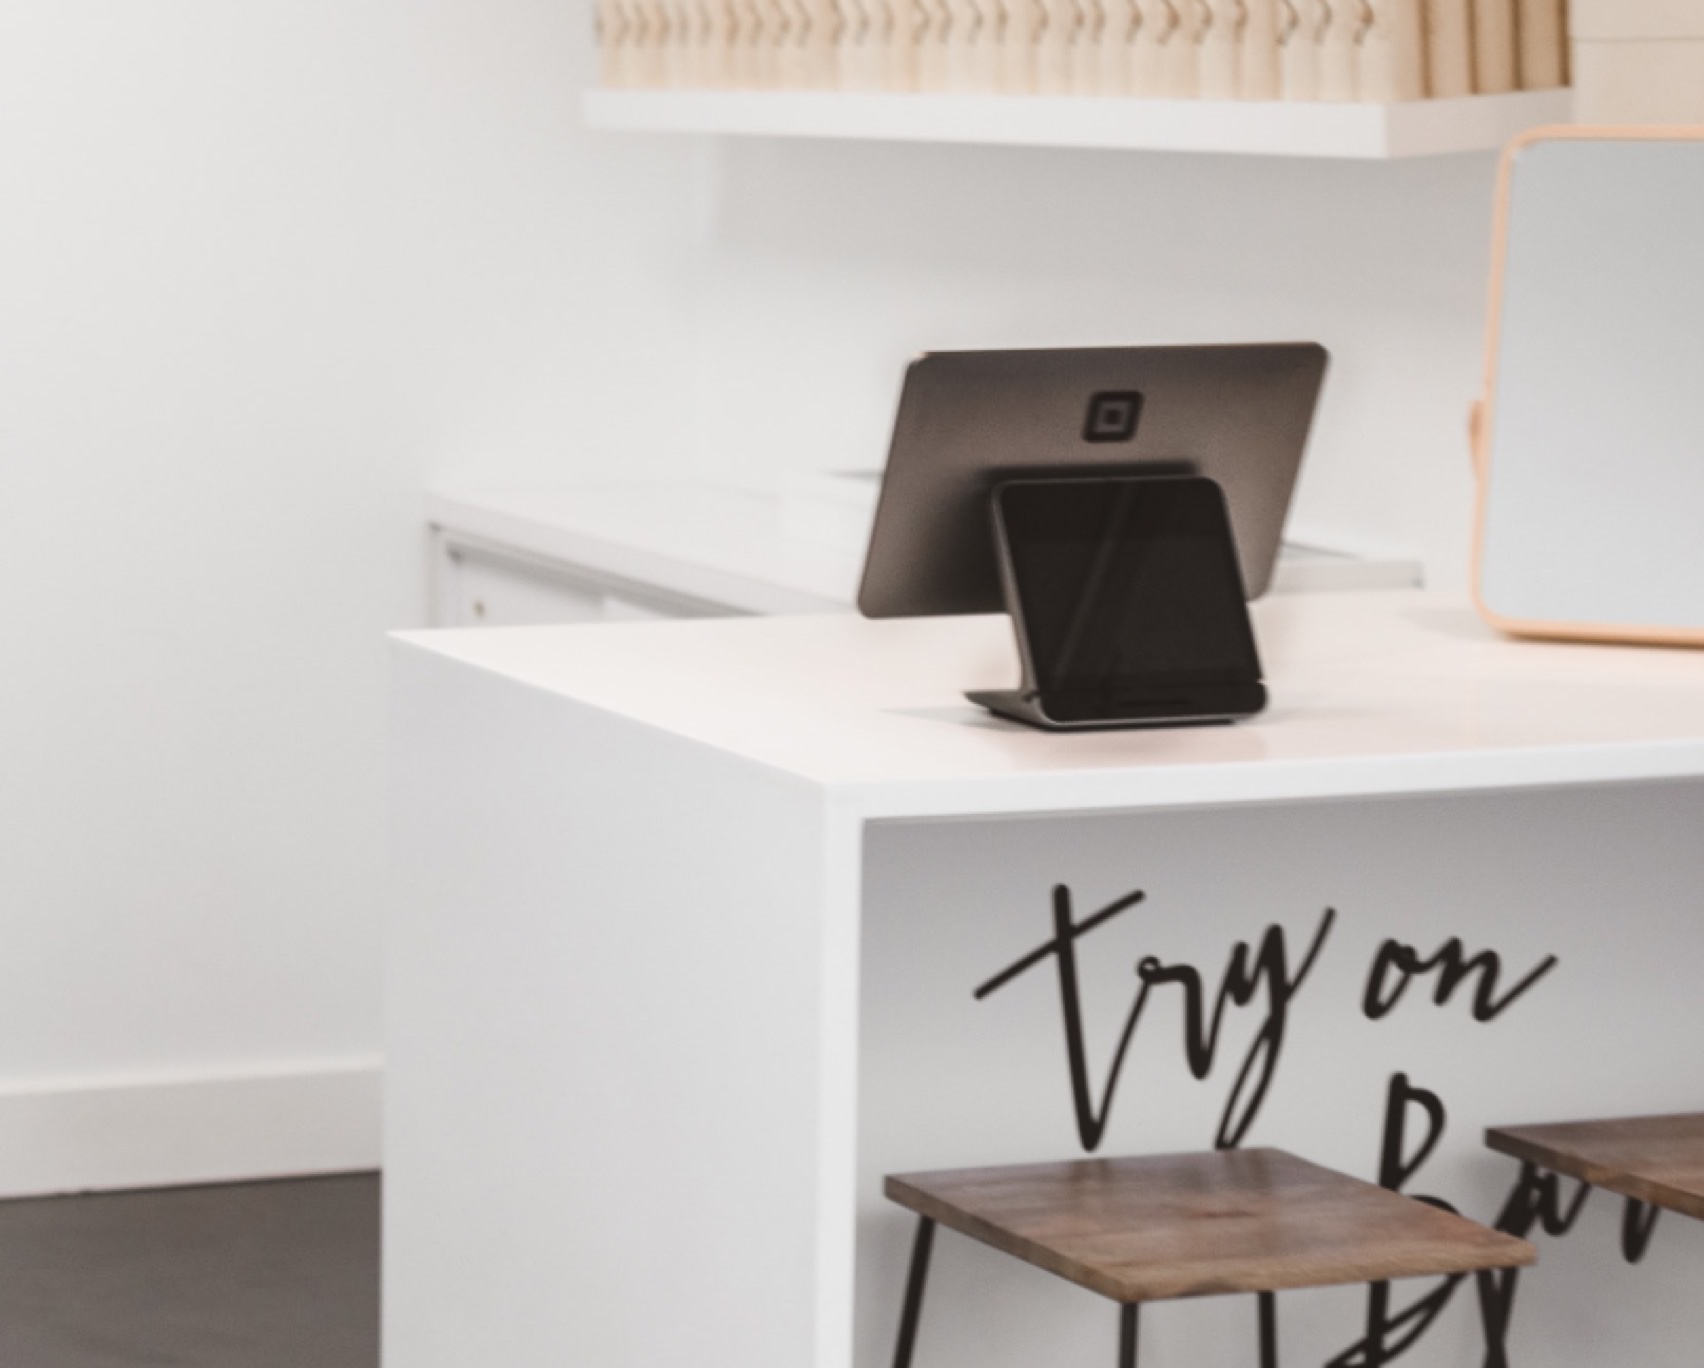 Shopify POS in Store